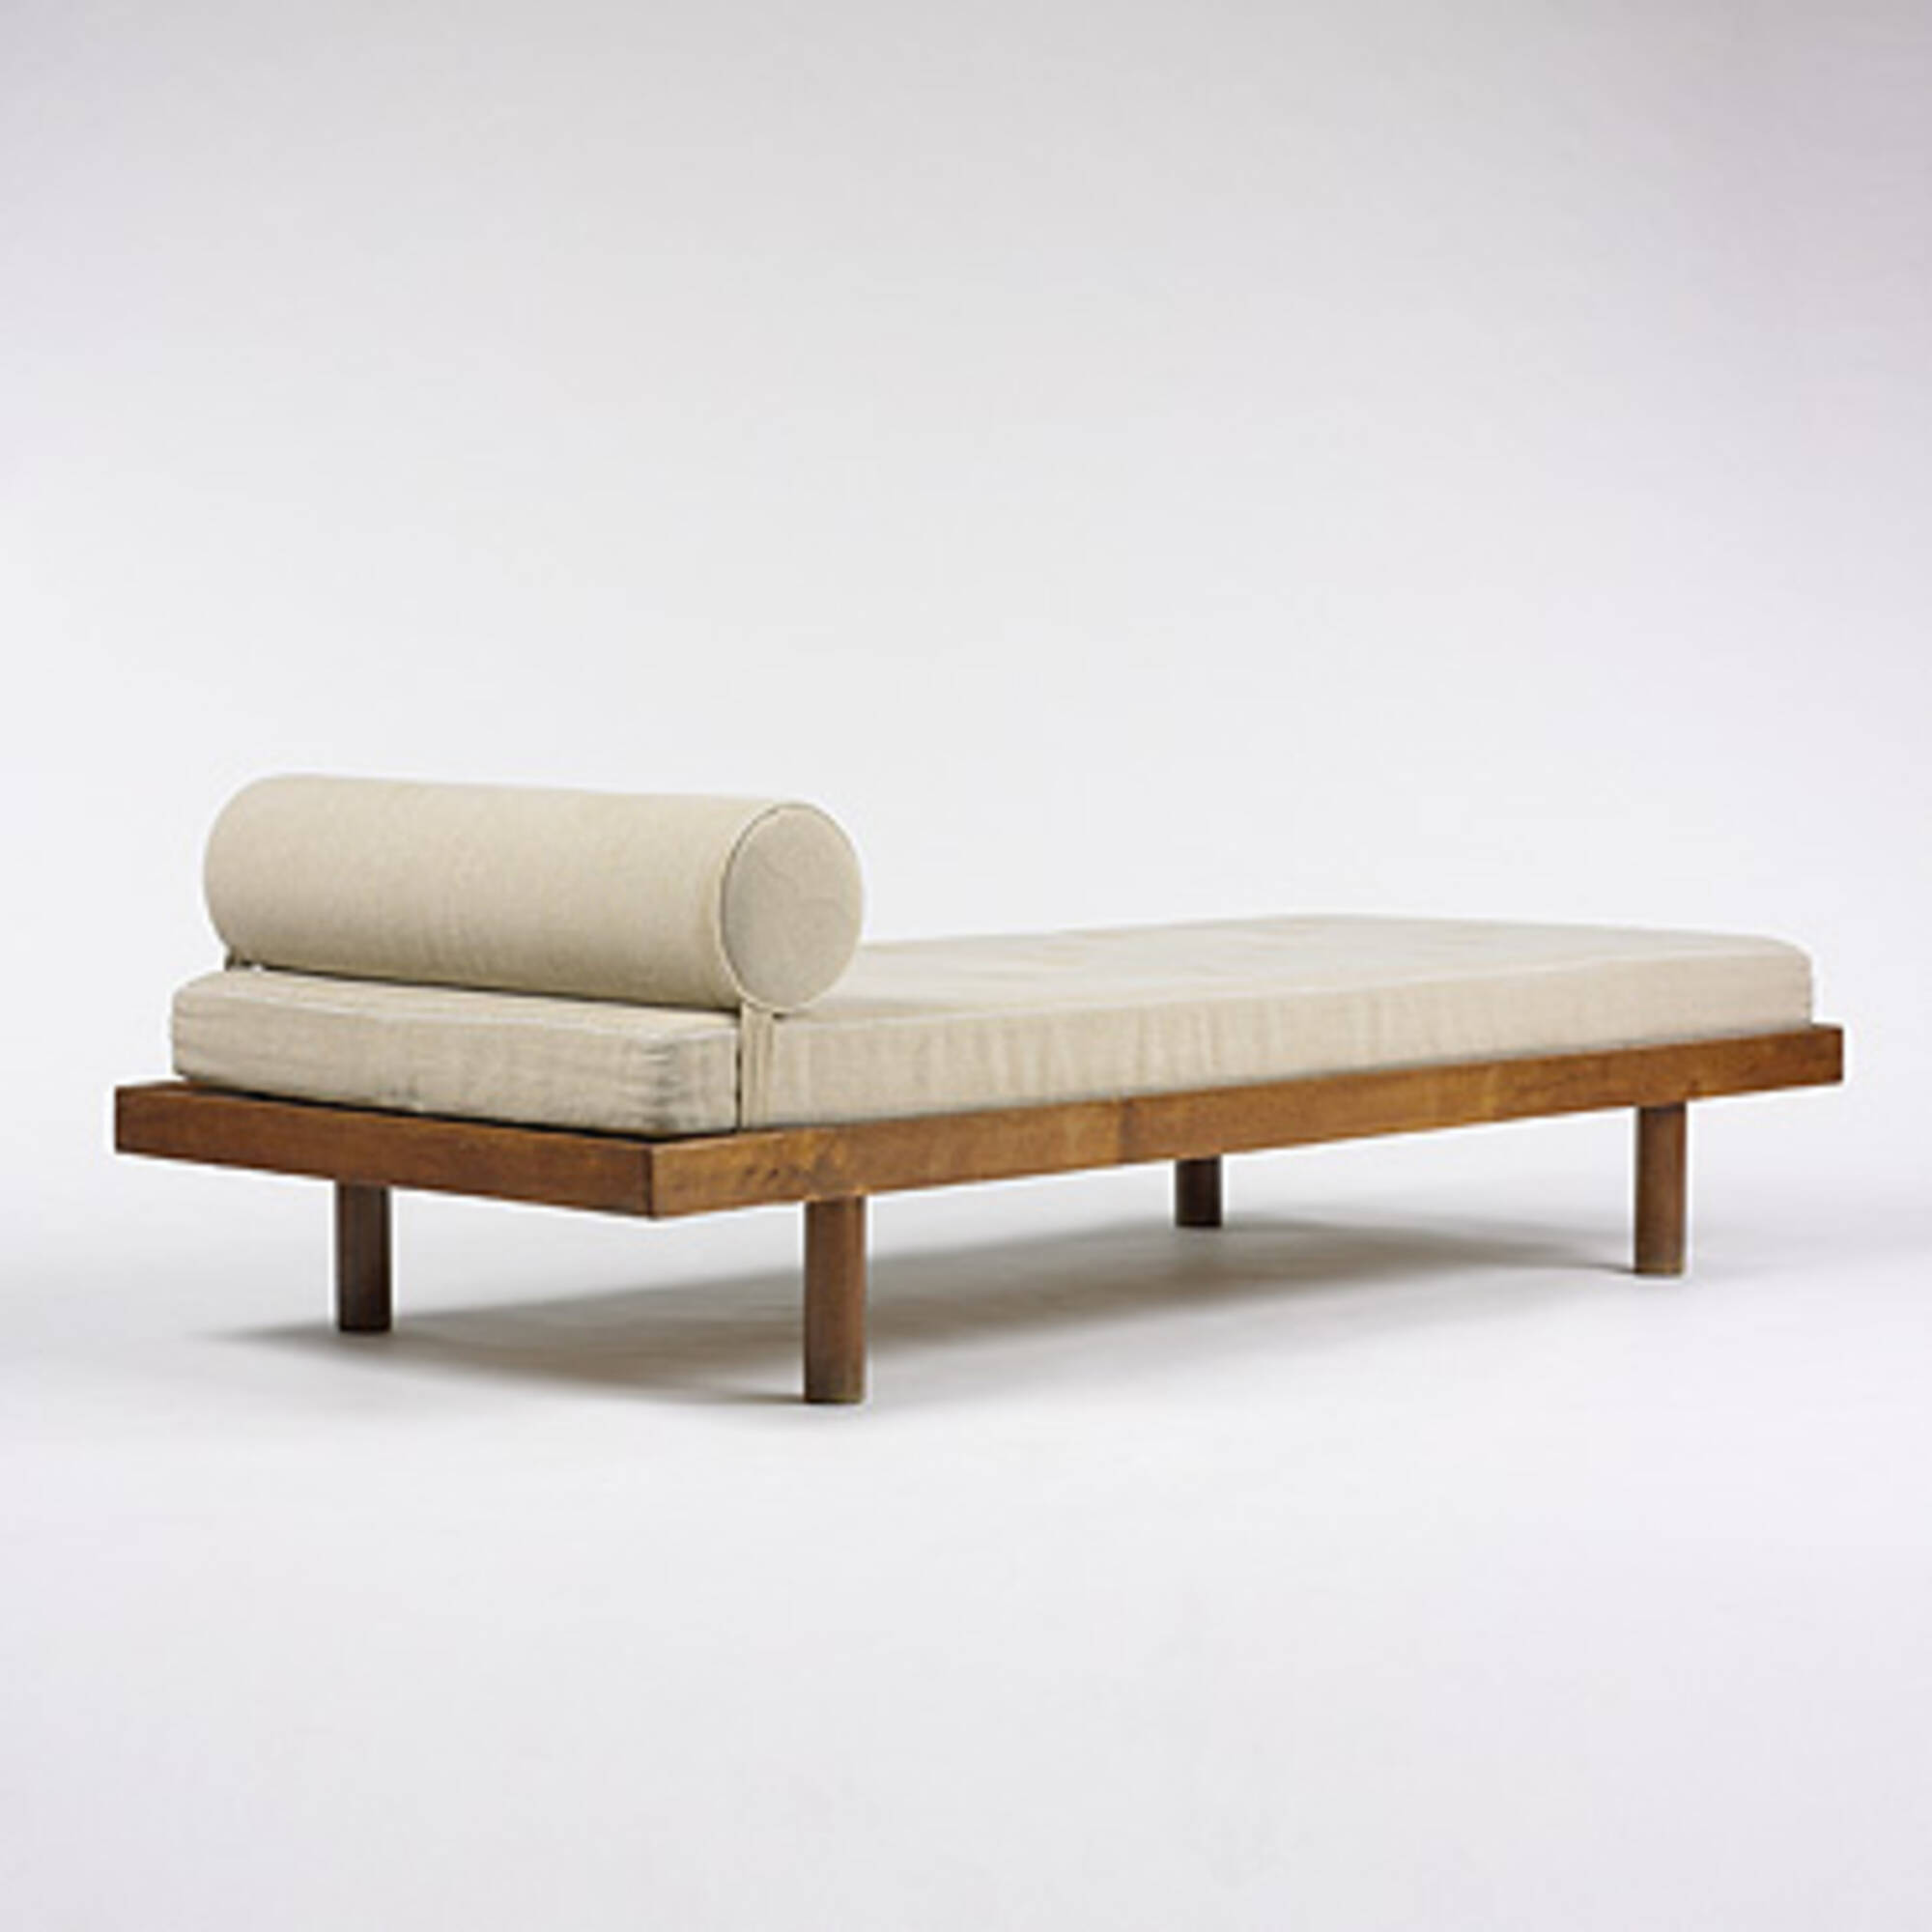 A “Cansado” bench (daybed), designed by Charlotte Perriand - Design  2019/10/02 - Estimate: EUR 5,000 to EUR 8,000 - Dorotheum